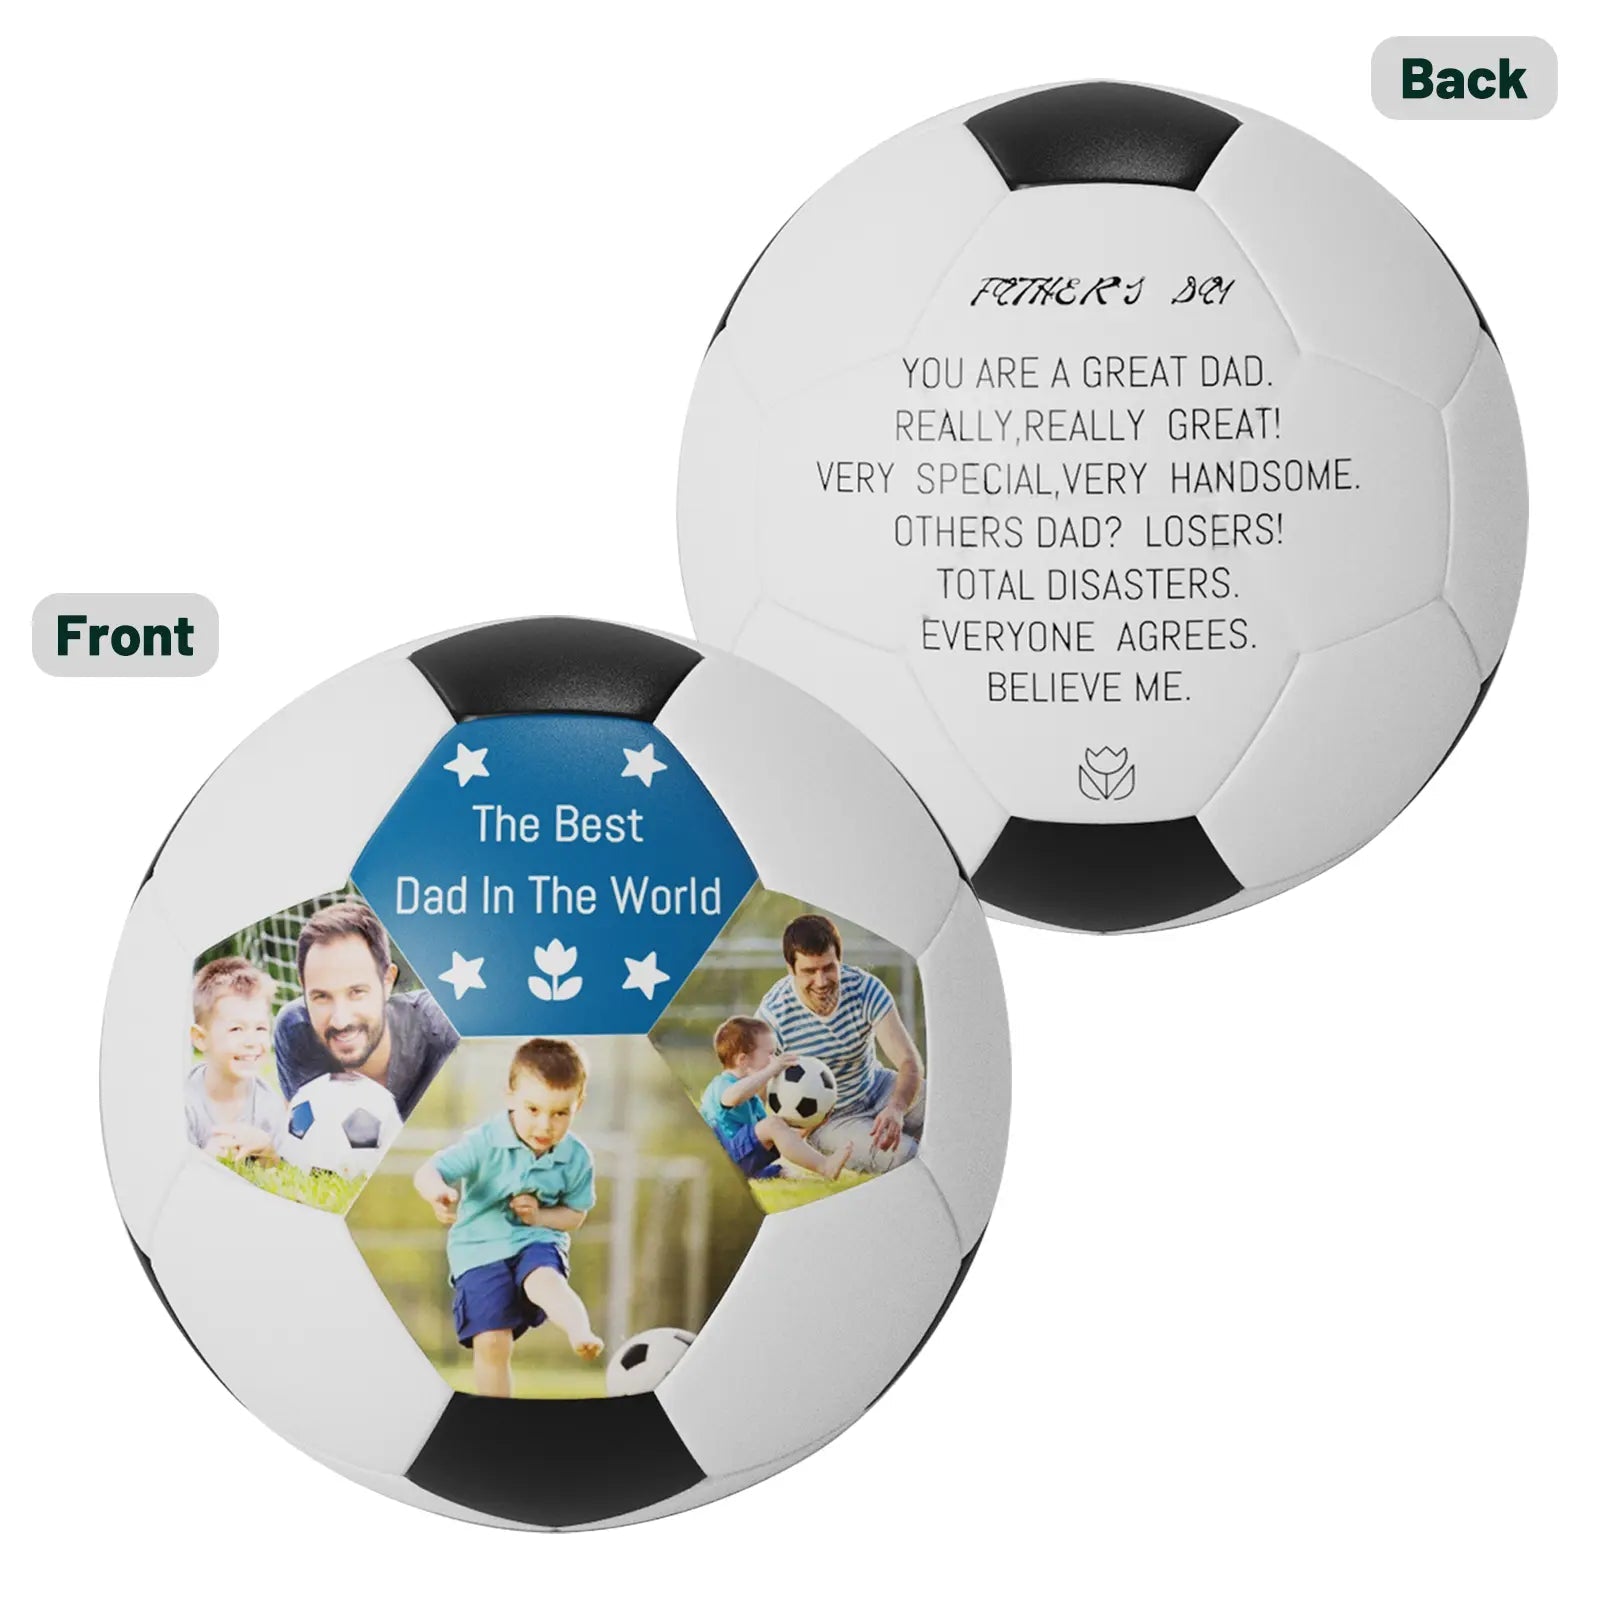 Personalized Custom Father's Day Gifts Soccer Ball No.5 - Family Watchs